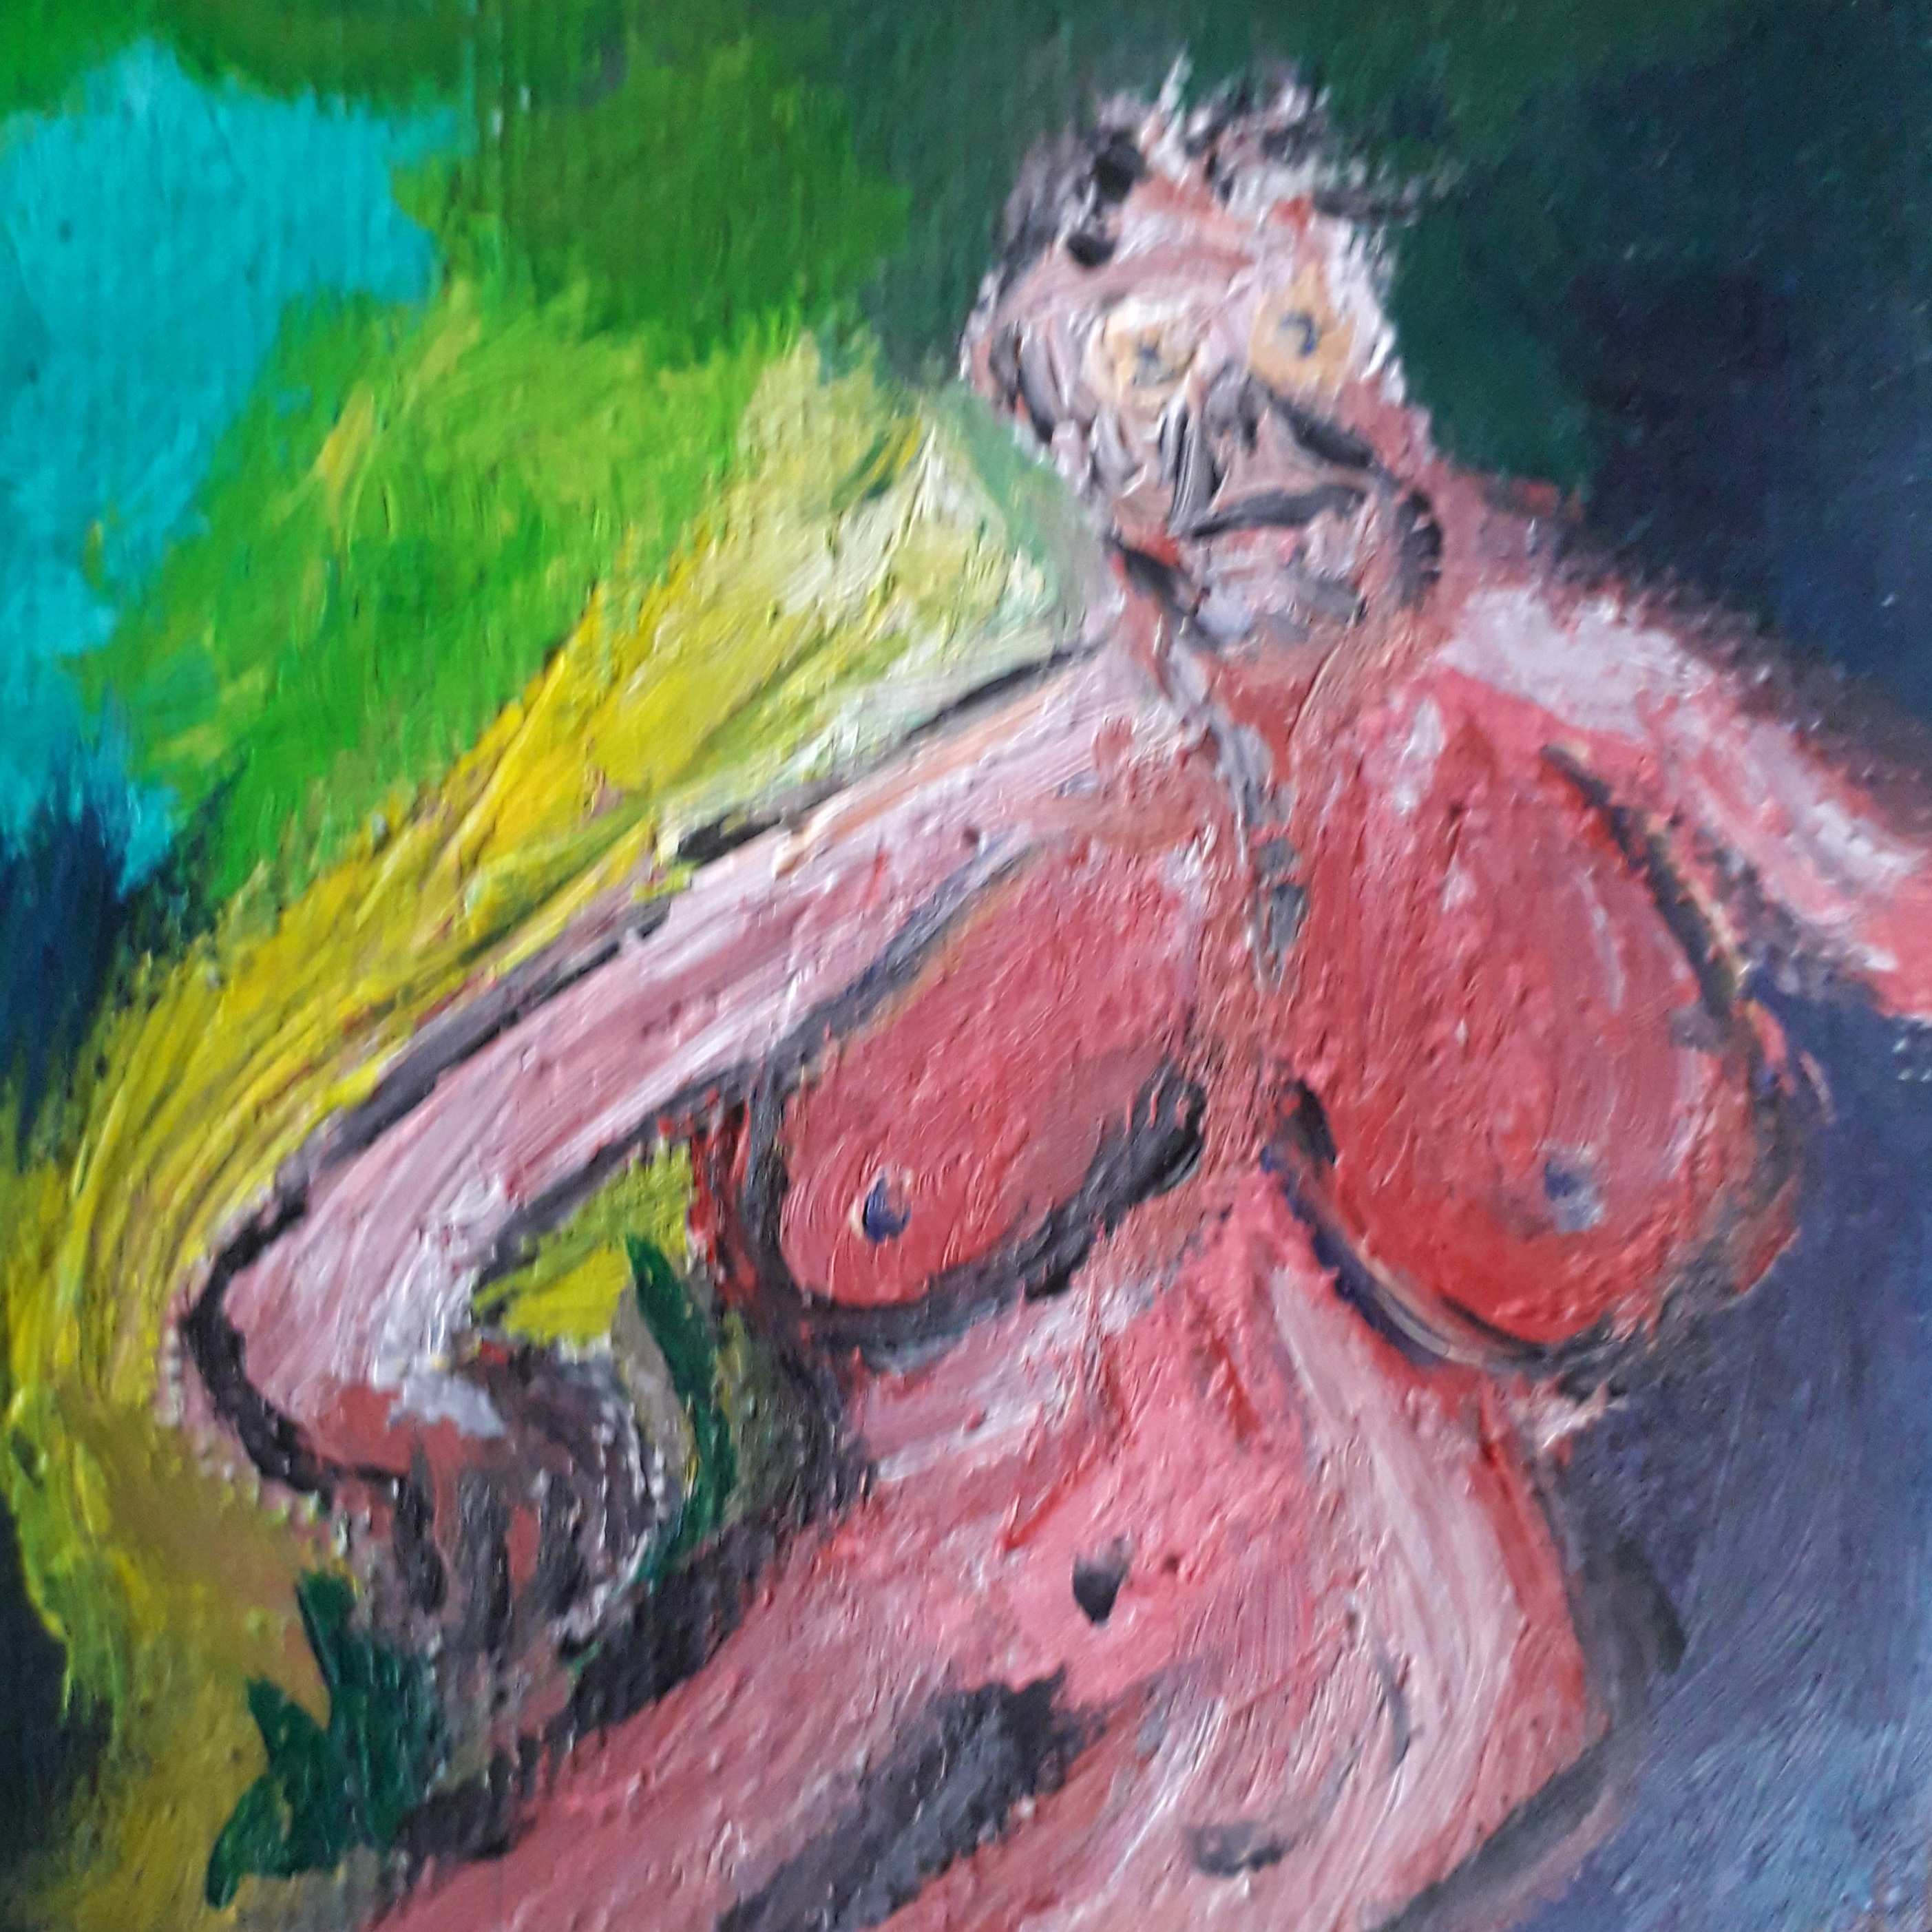 Sins Of The Flesh - Oil on Canvas - 2.5×2.5 - £5.00